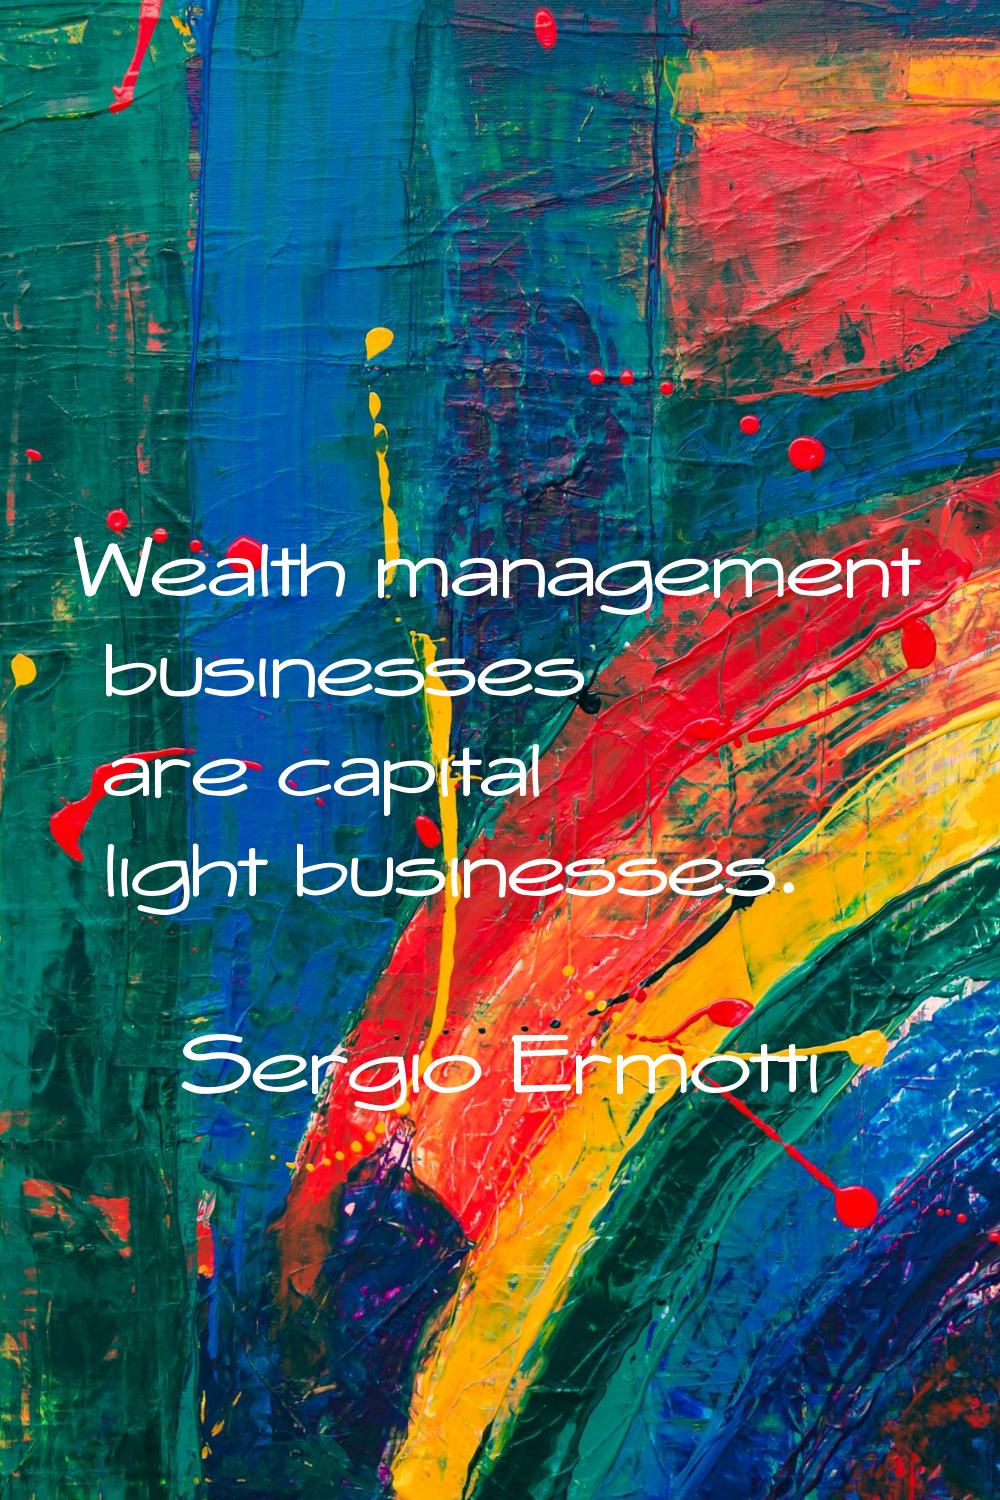 Wealth management businesses are capital light businesses.